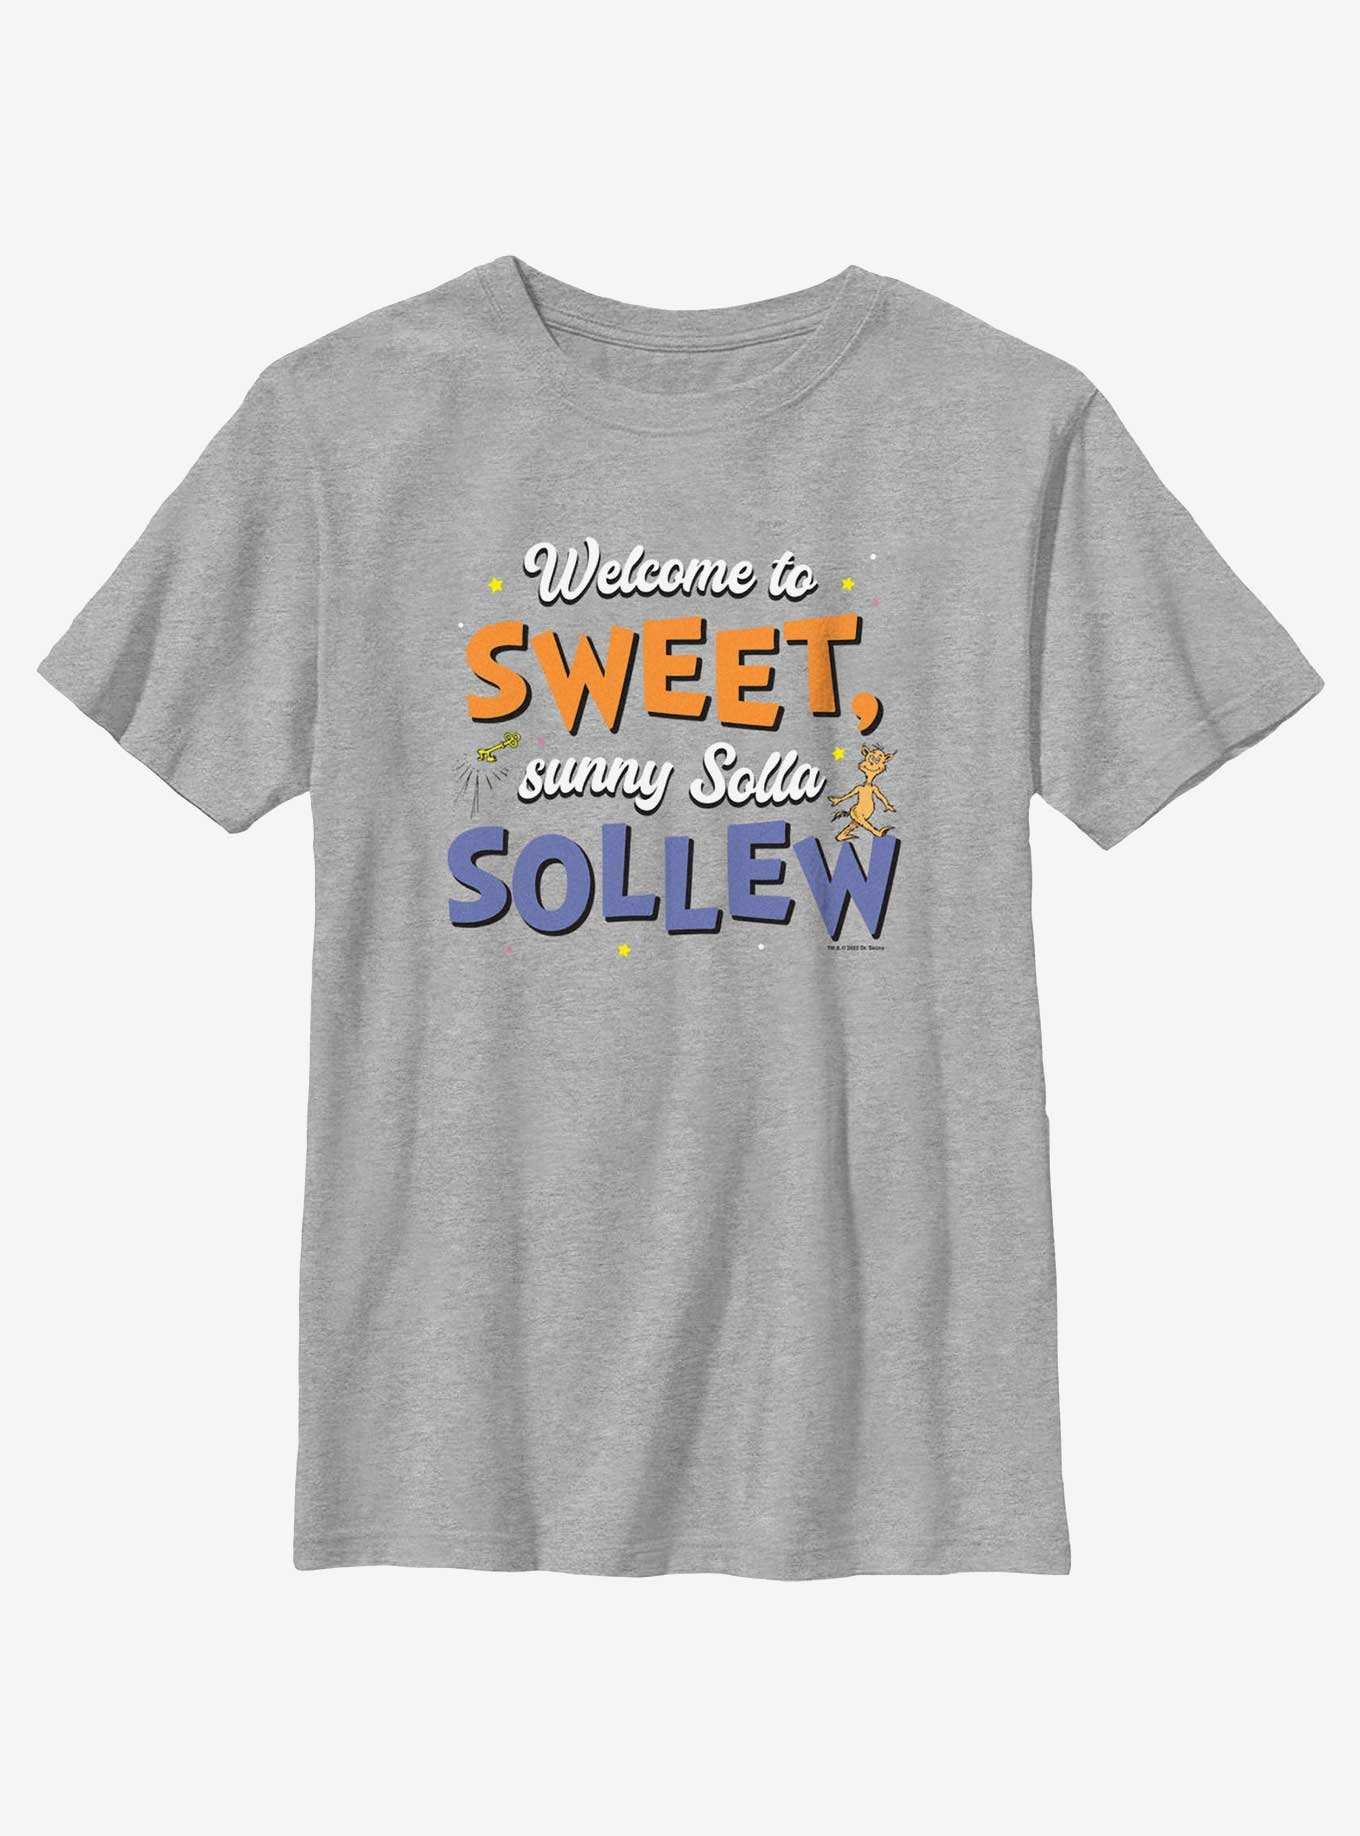 Dr. Seuss's I Had Trouble Getting Into Solla Sollew Welcome To Sweet Sunny Solla Sollew Youth T-Shirt, , hi-res